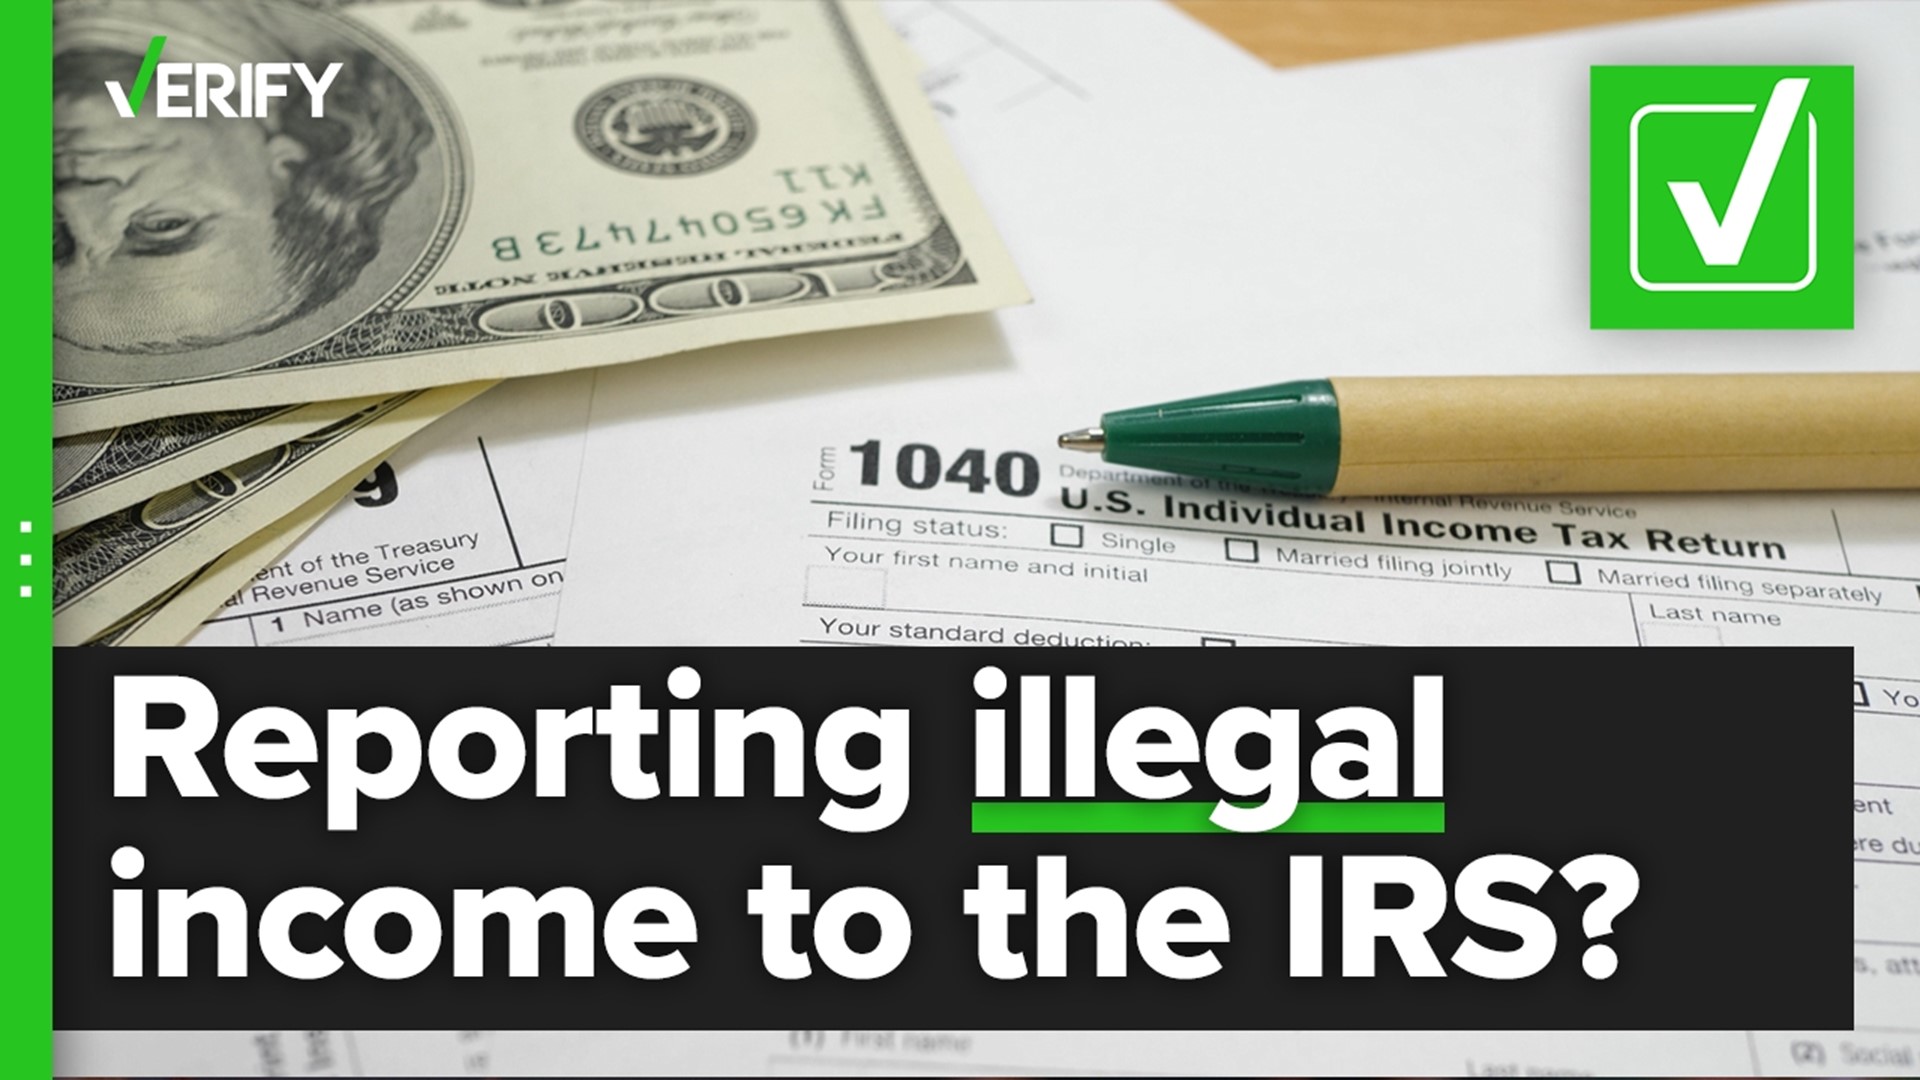 Does the IRS require people to report income from illegal activities? The VERIFY team confirms this is true.